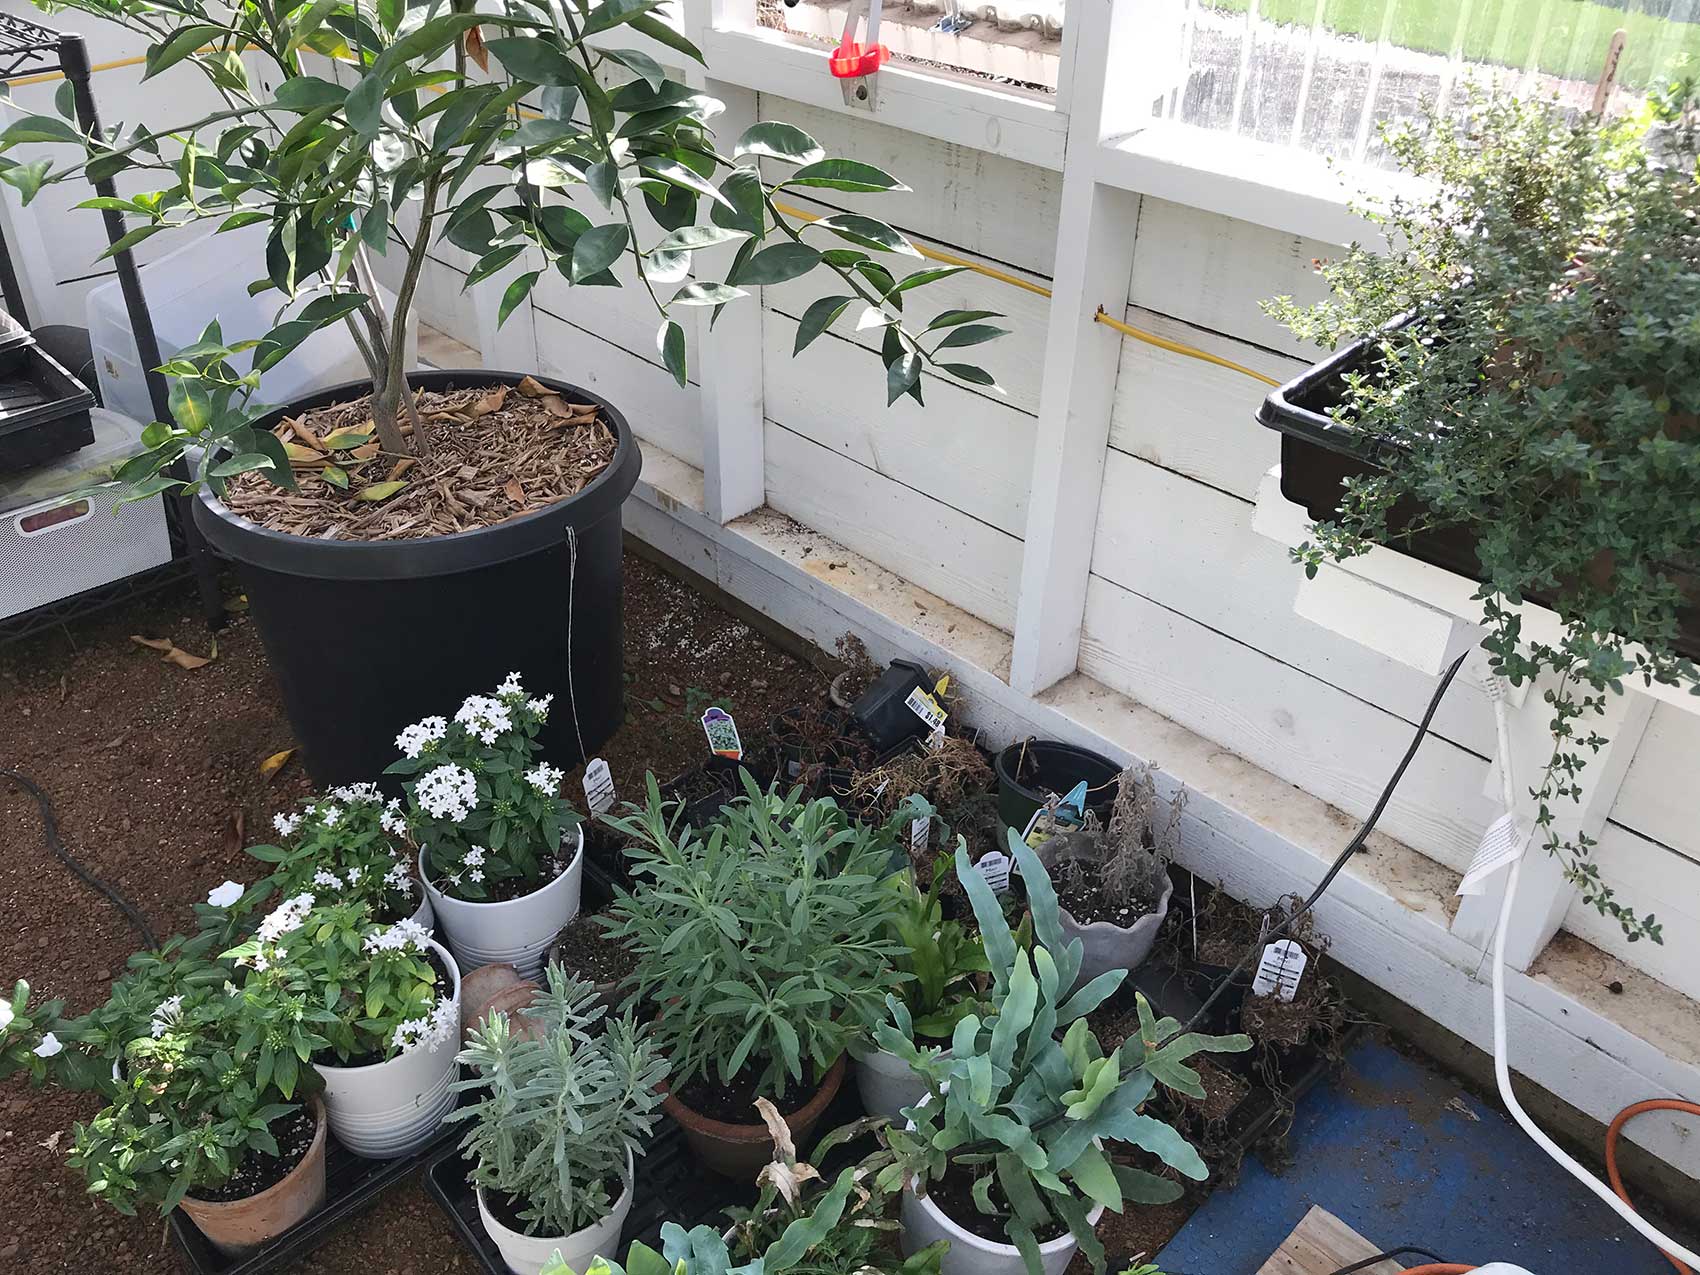 plants and flowers in the greenhouse